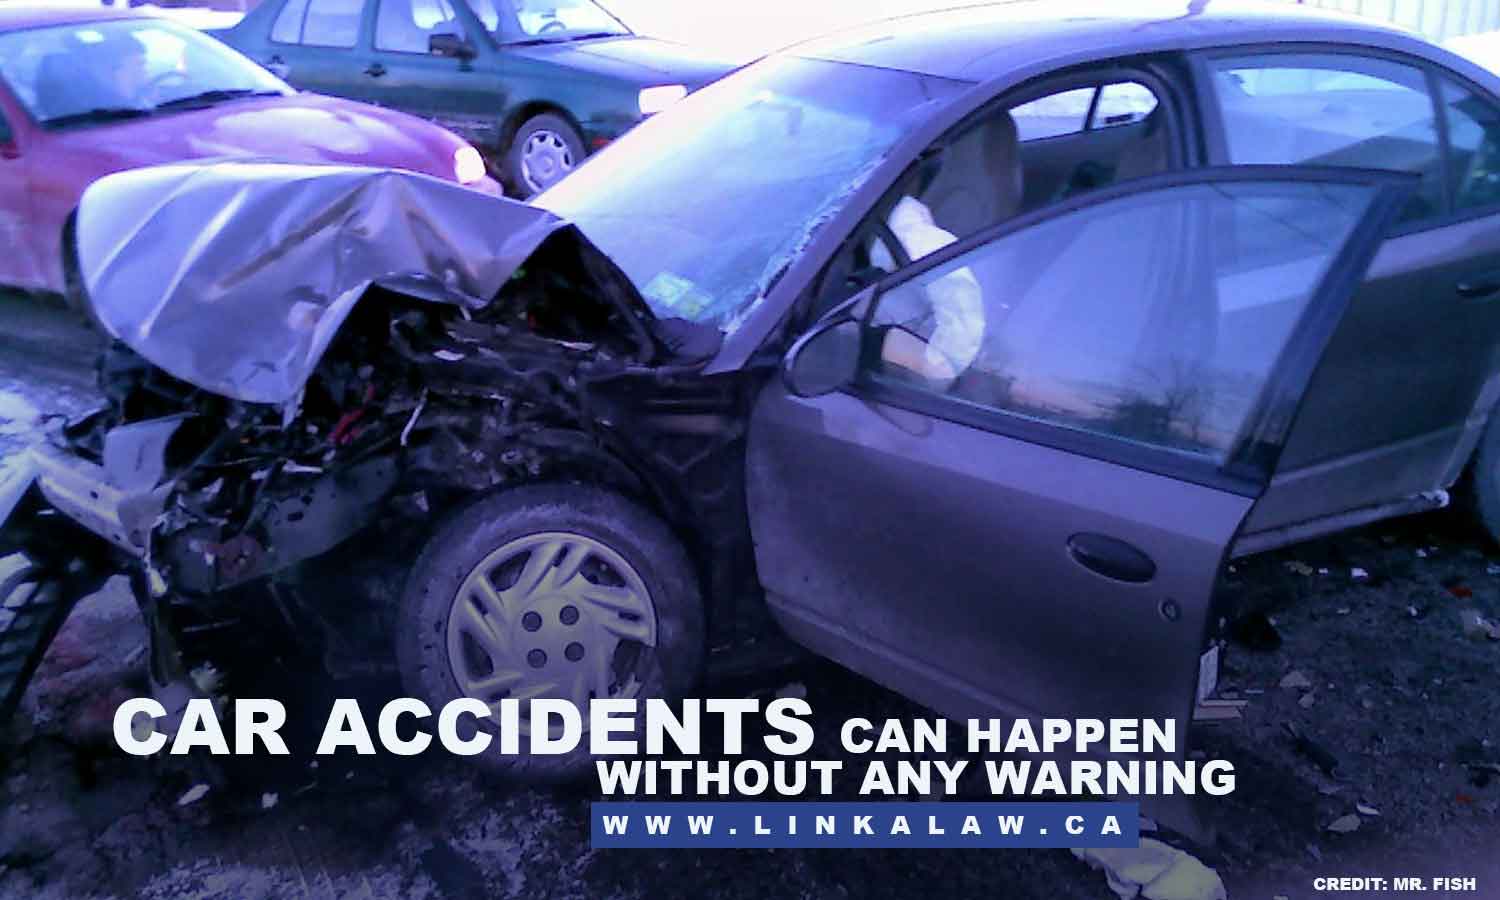 Car accidents can happen without any warning